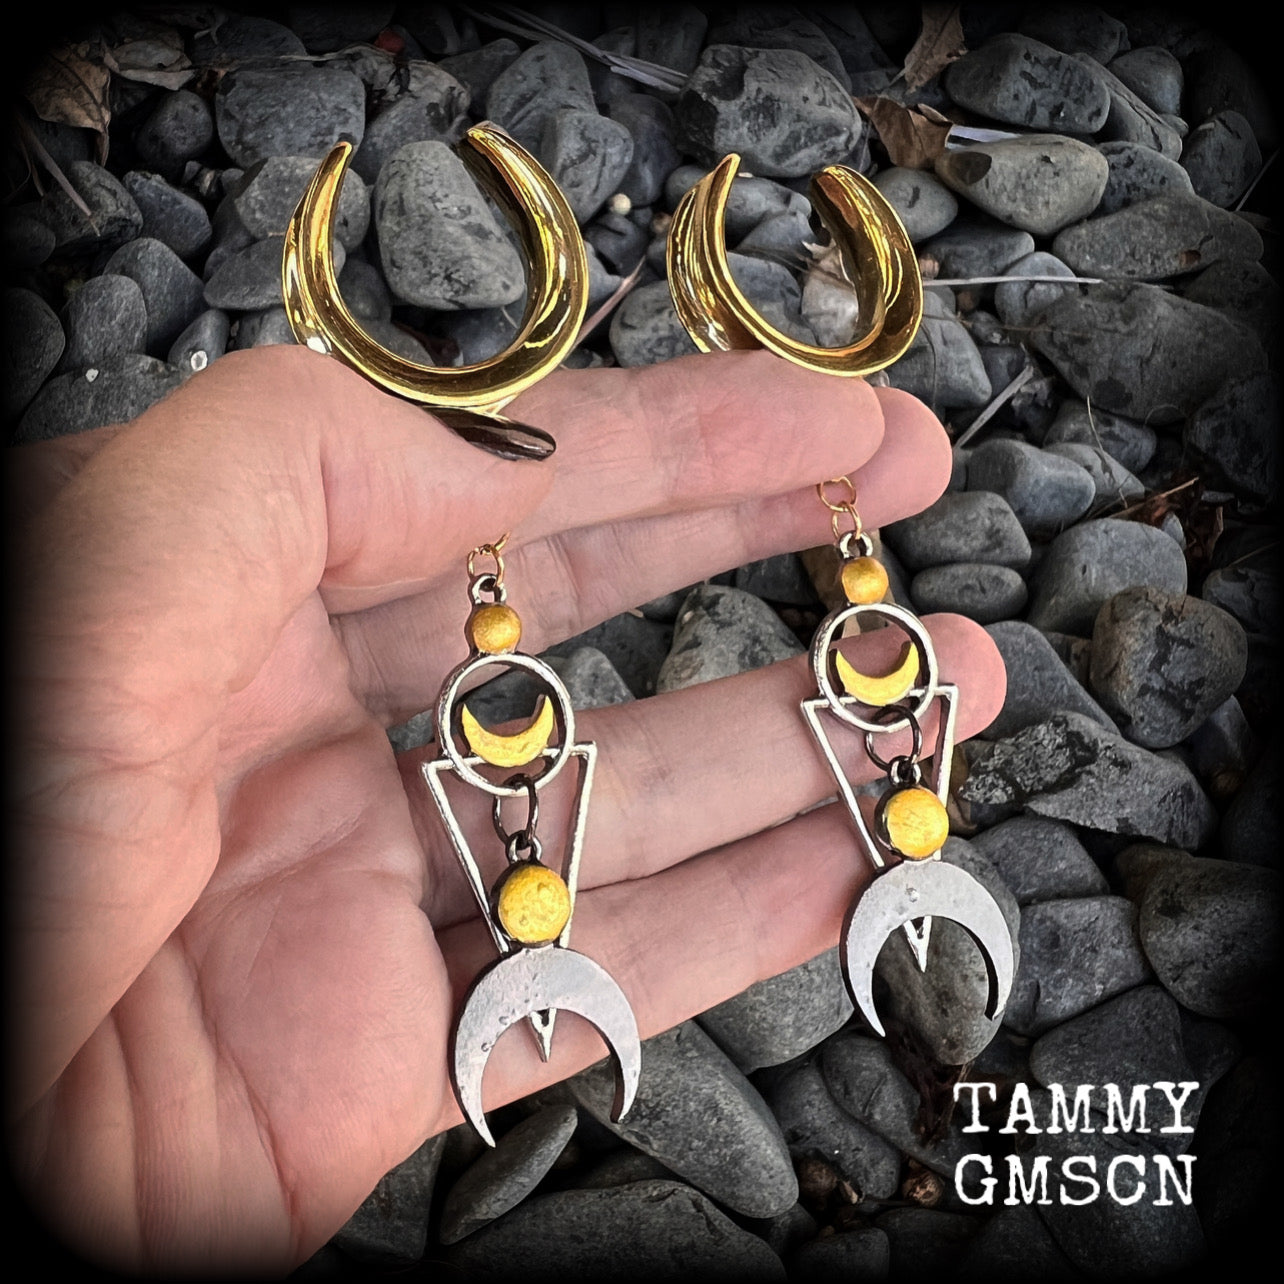 Crescent moon and inverted triangle hanging gauges-Occult gauges